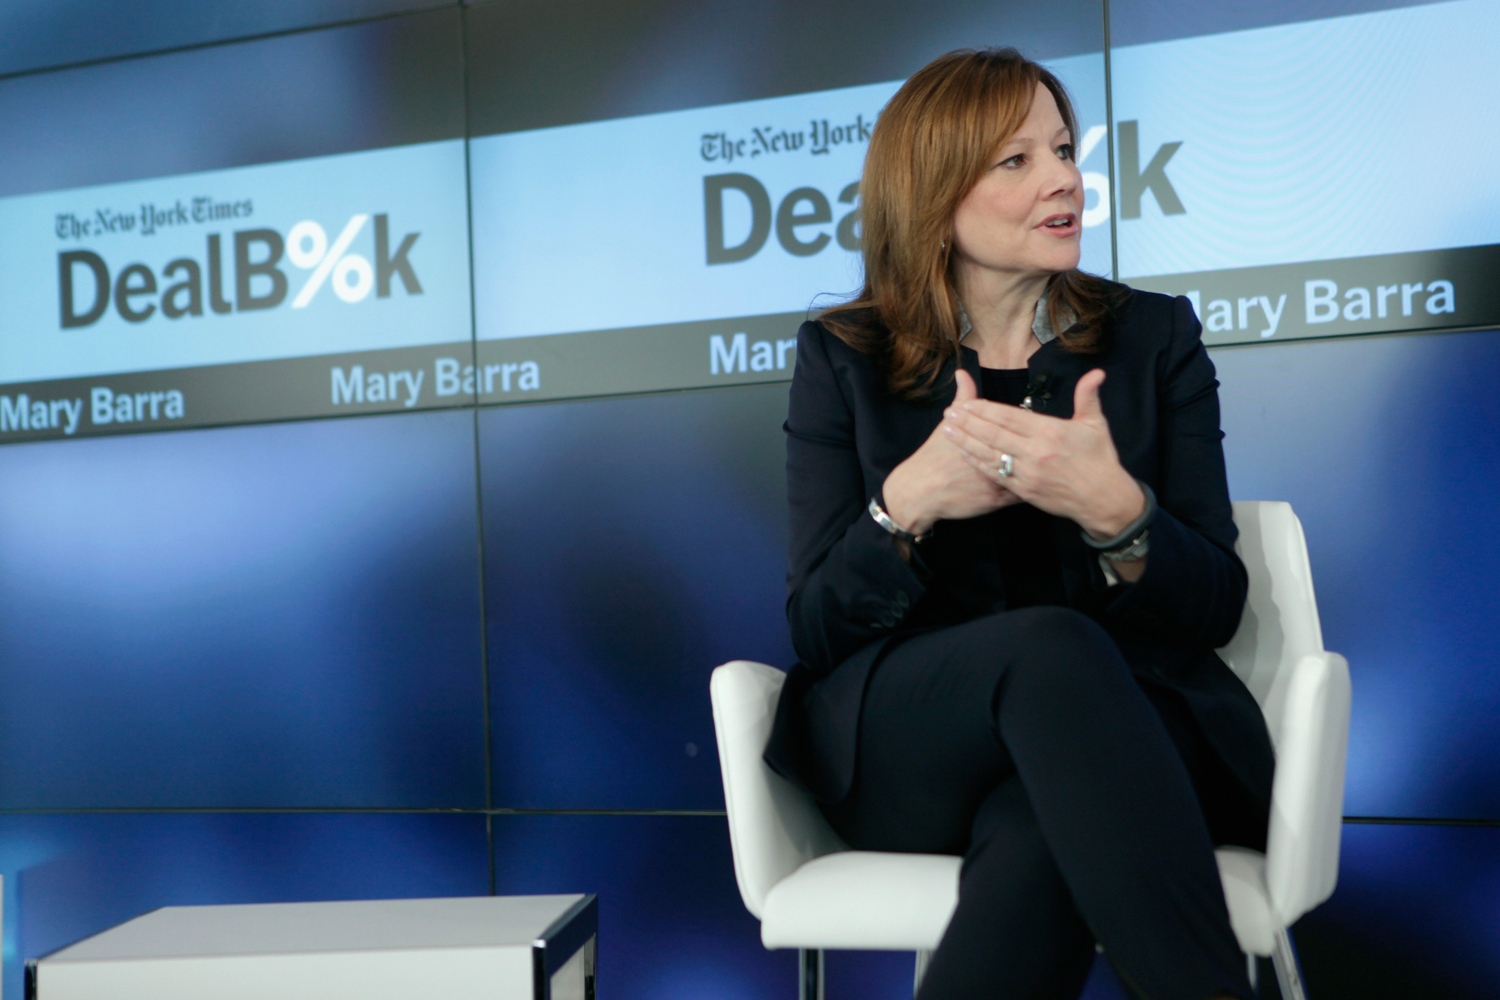 General Motors CEO Mary Barra speaks onstage during The New York Times DealBook Conference at One World Trade Center on Dec. 11, 2014 in New York City. (Thos Robinson — Getty Images)